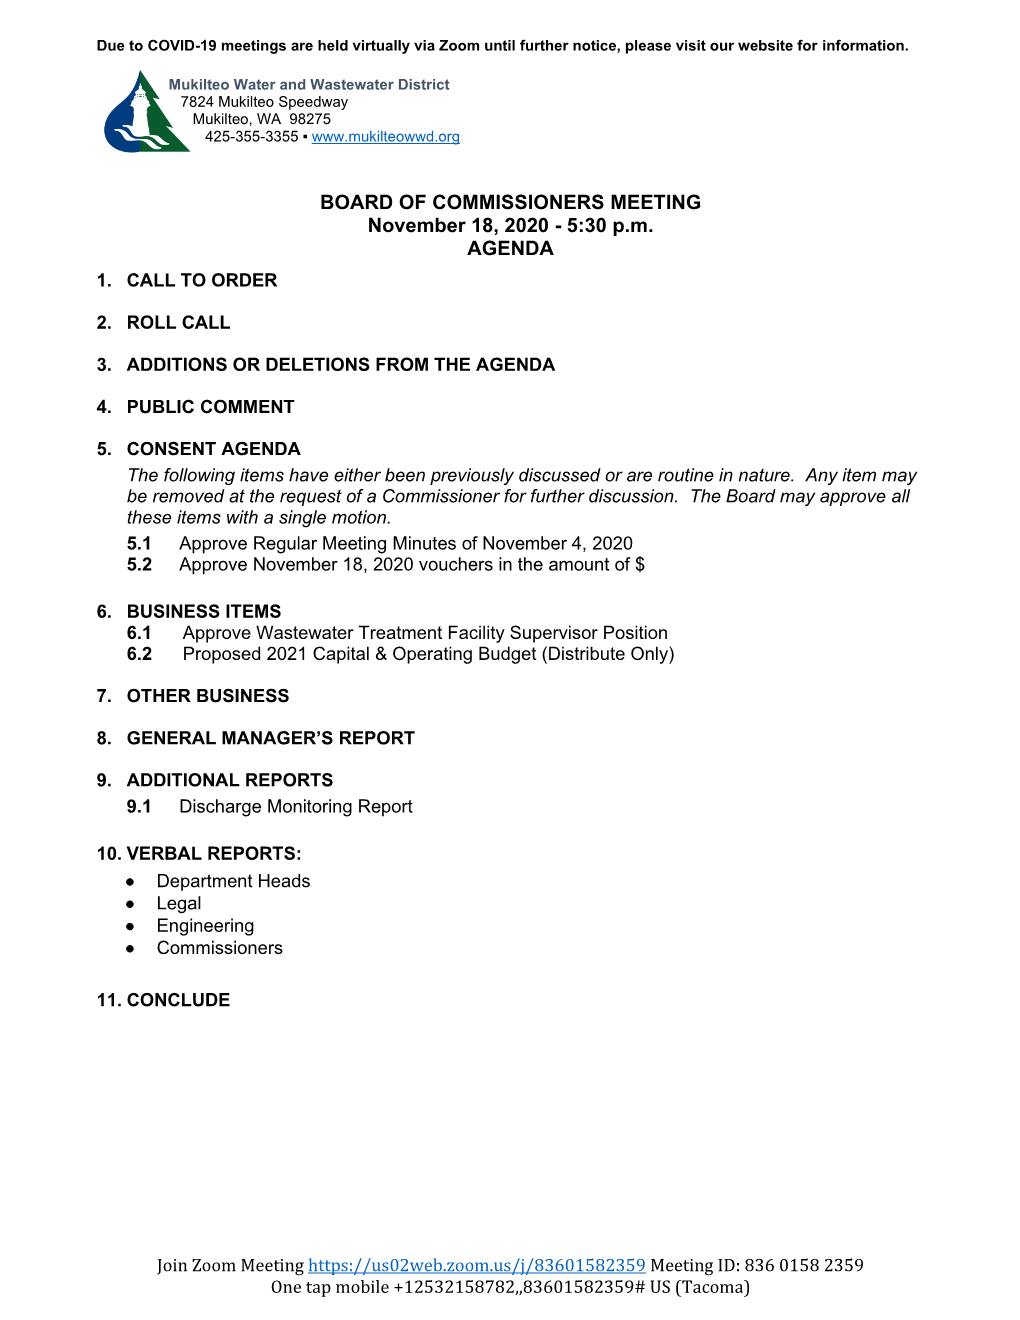 BOARD of COMMISSIONERS MEETING November 18, 2020 - 5:30 P.M